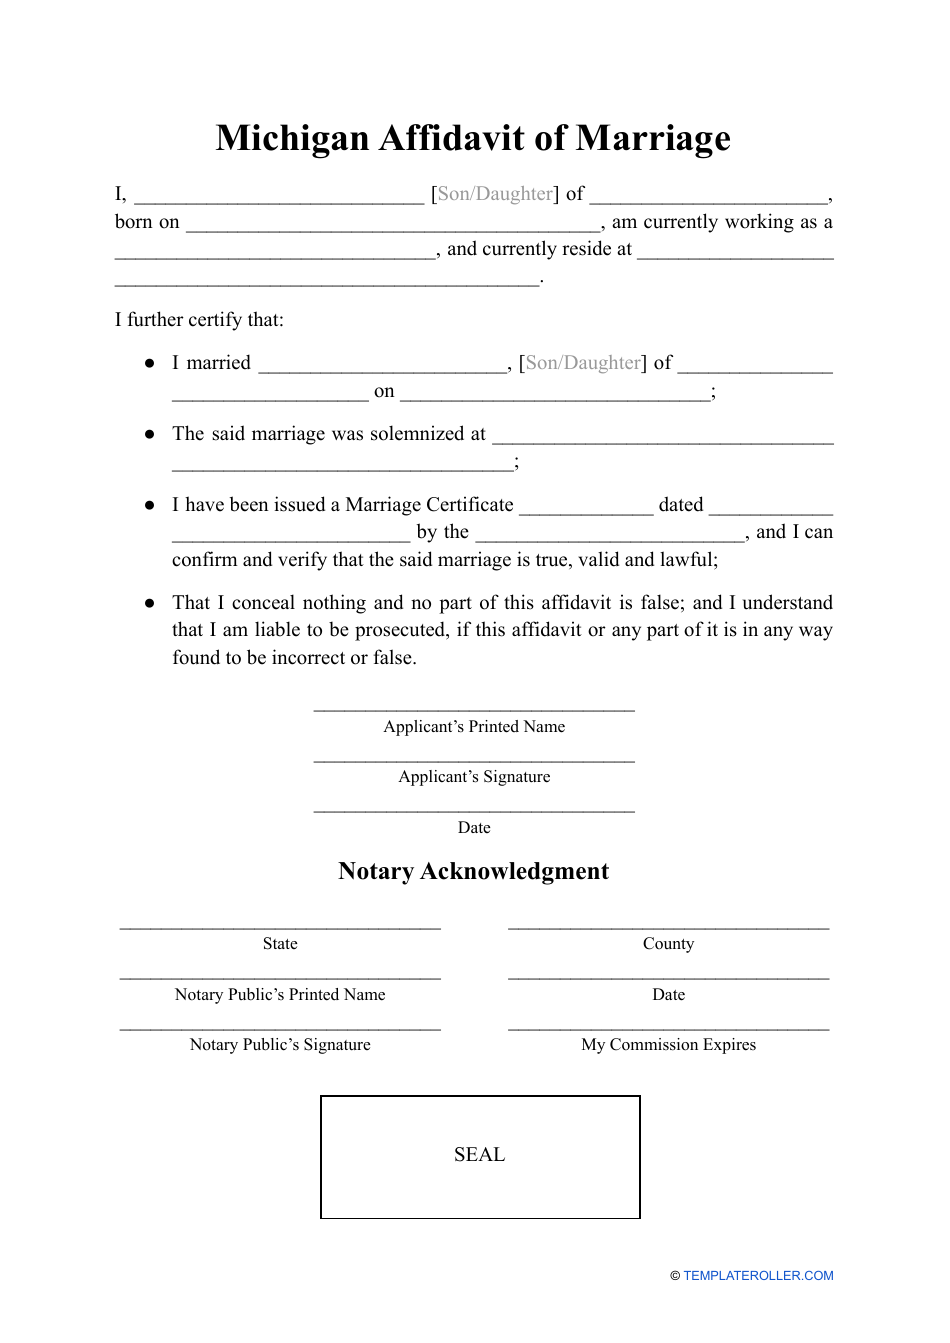 Michigan Affidavit Of Marriage Fill Out Sign Online And Download Pdf Templateroller 6307